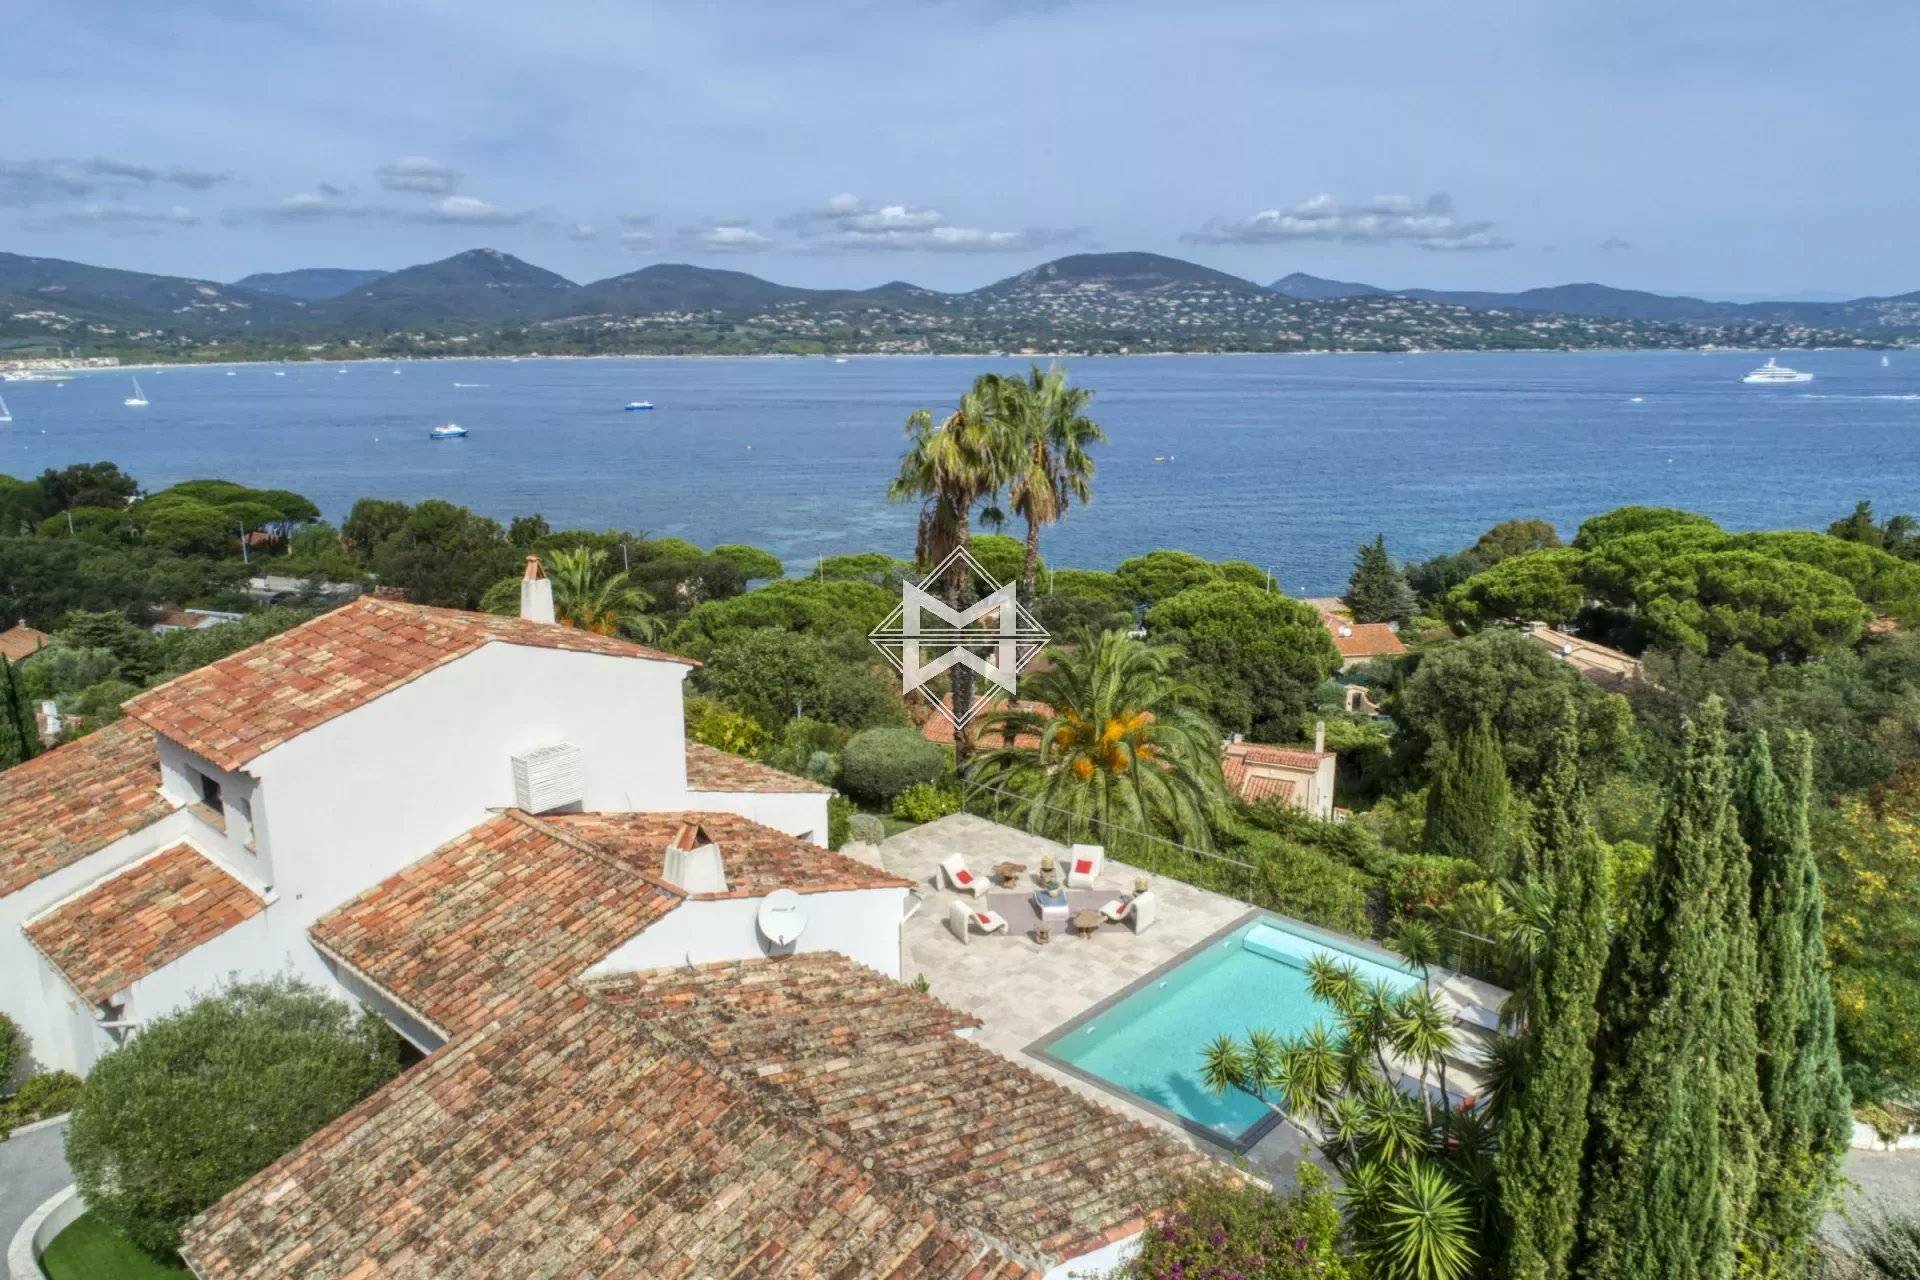 Panoramic view of the Bay of Saint Tropez